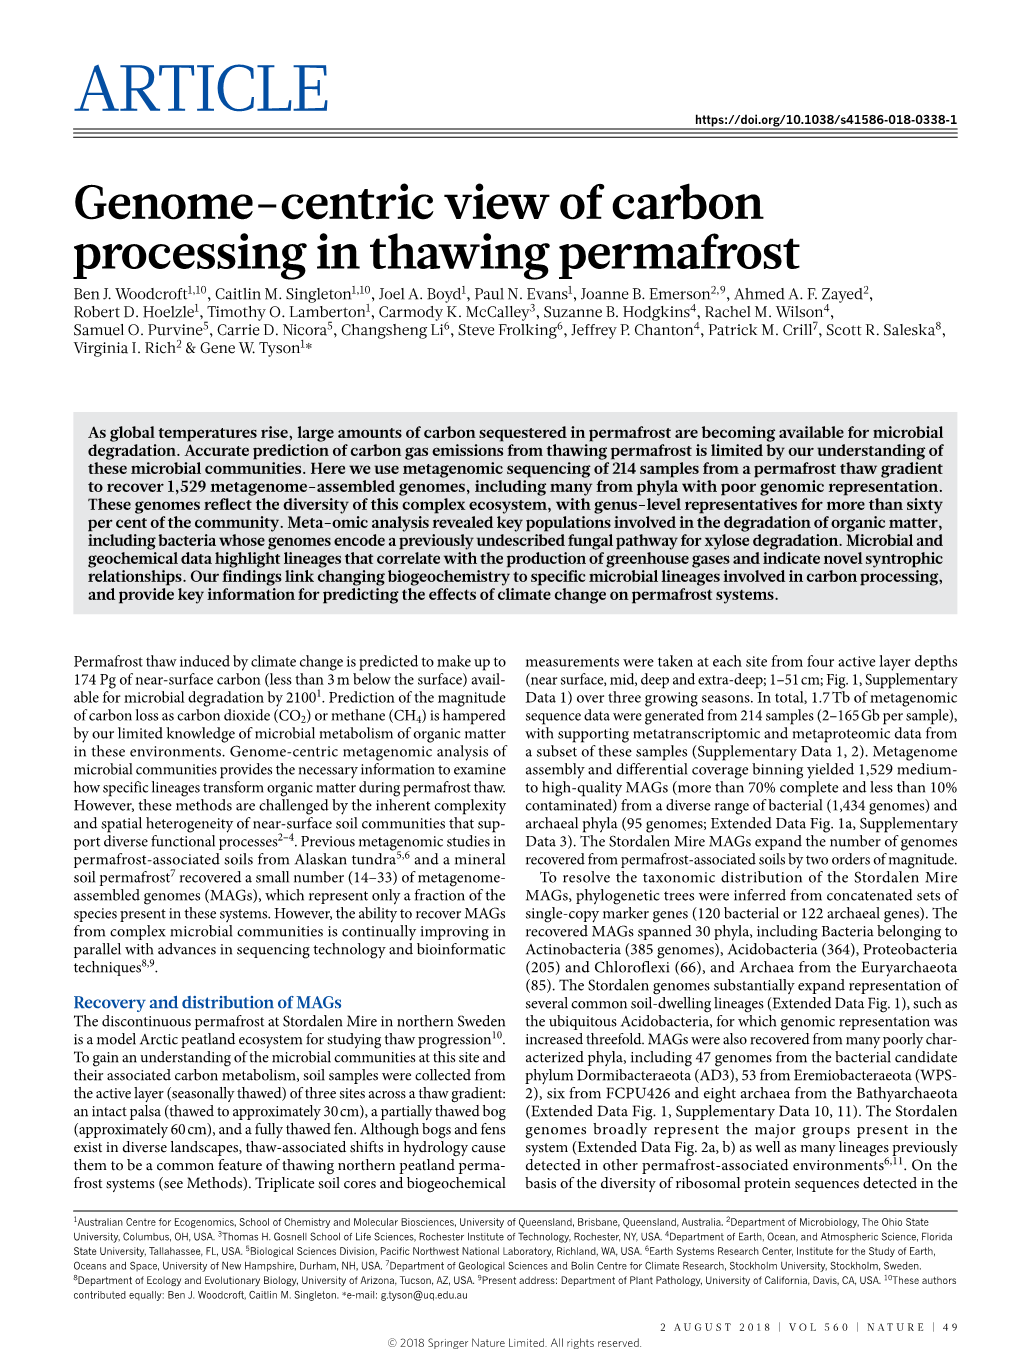 Genome-Centric View of Carbon Processing in Thawing Permafrost Ben J